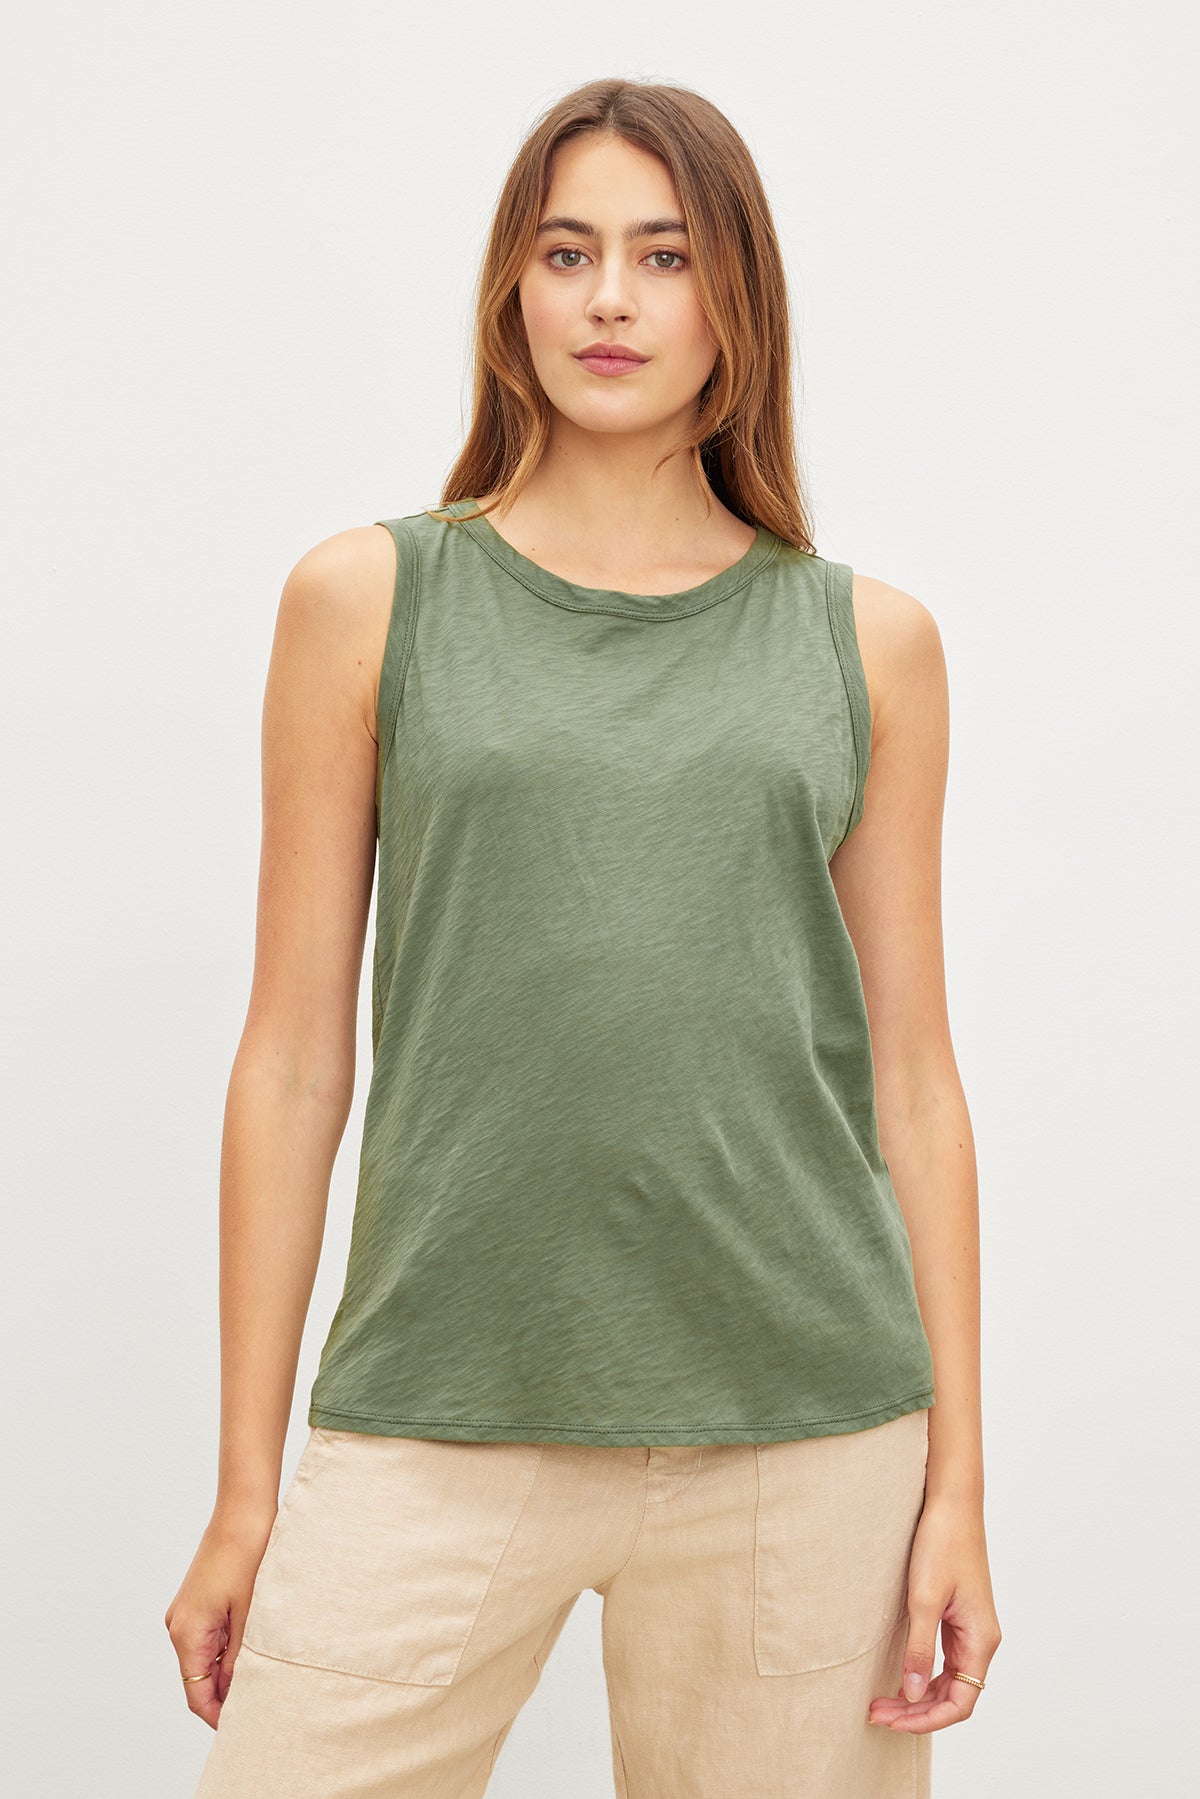 A woman in a Velvet by Graham & Spencer TAURUS COTTON SLUB TANK tank top and beige pants standing against a plain background.-35982876344513